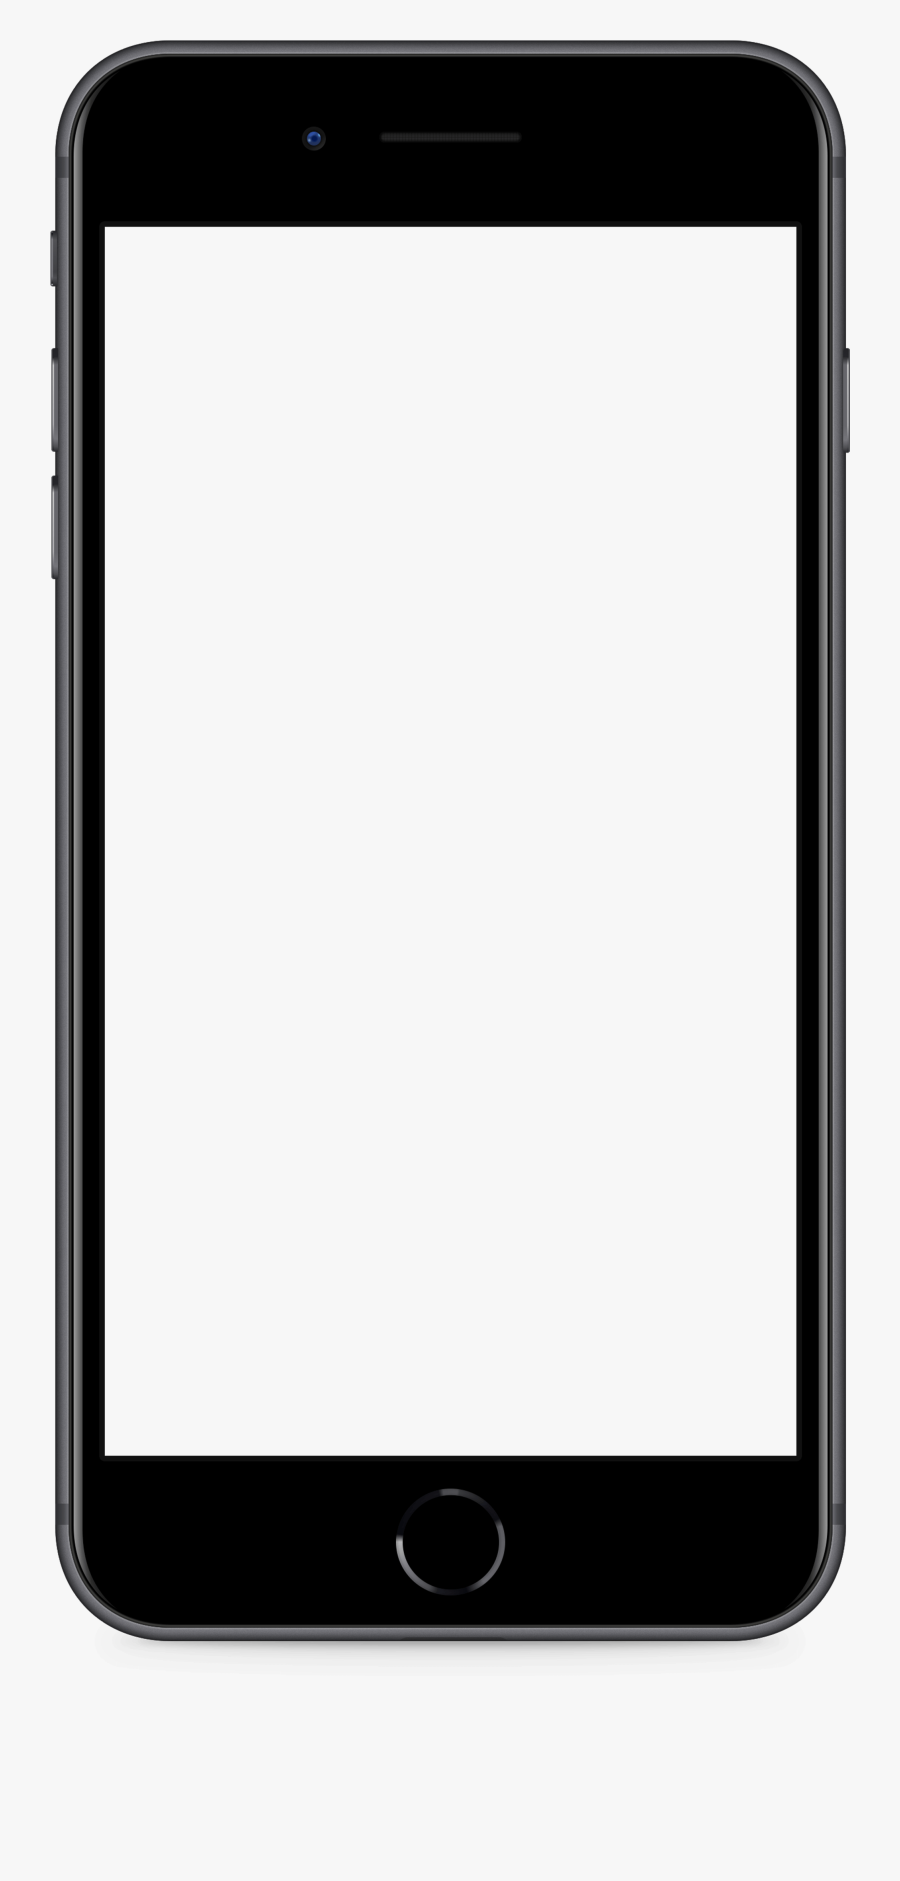 Iphone Screen For Powerpoint, Transparent Clipart